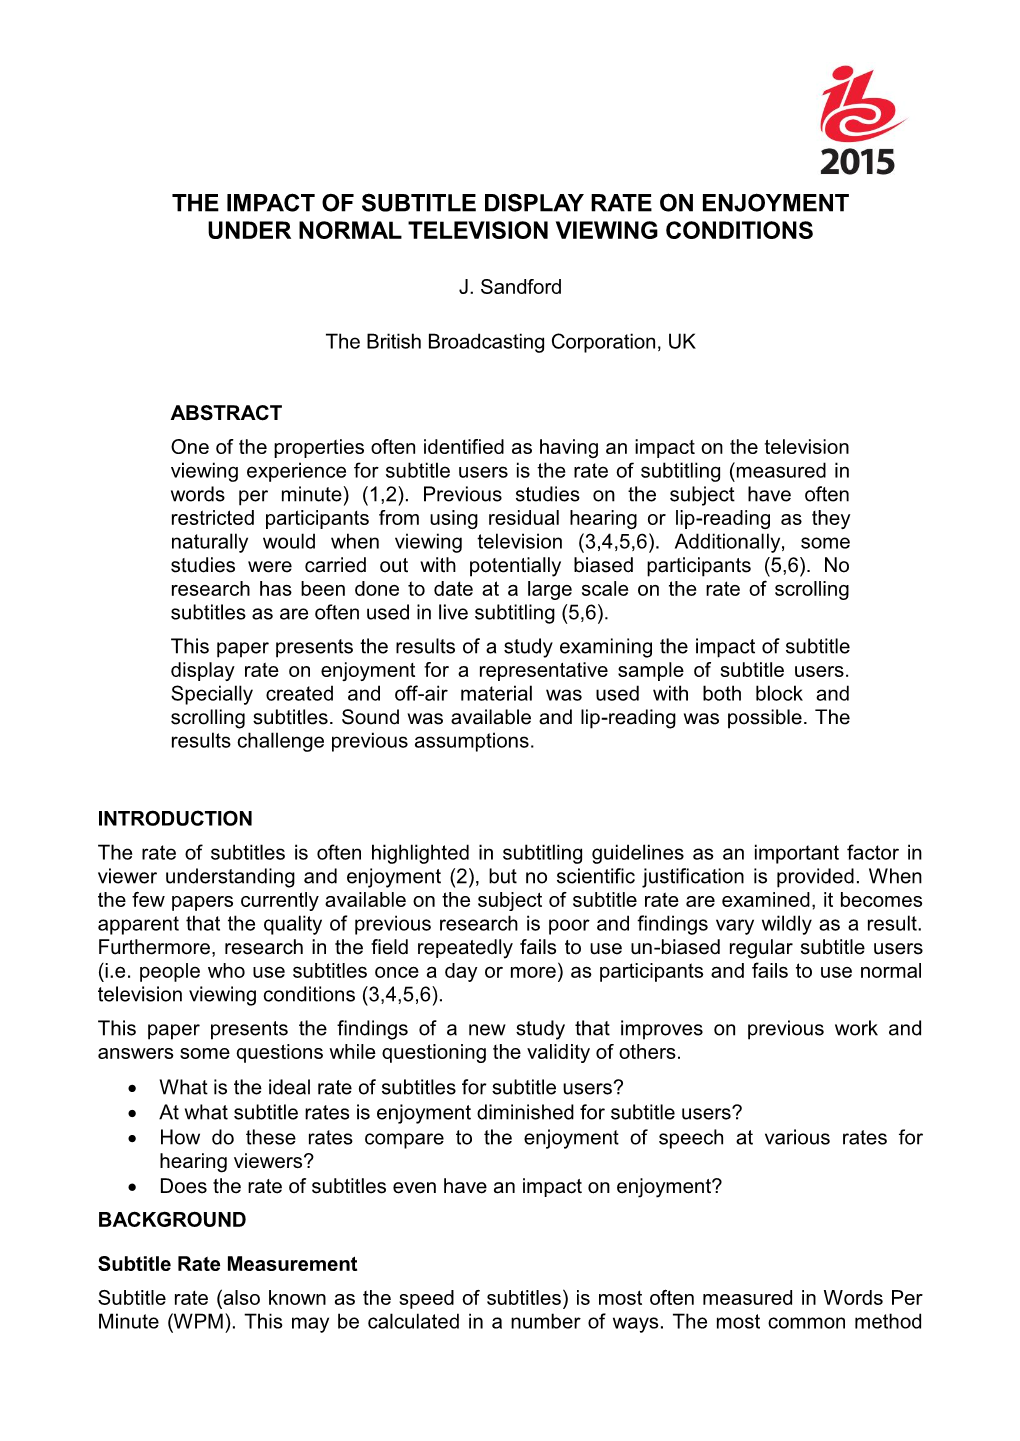 The Impact of Subtitle Display Rate on Enjoyment Under Normal Television Viewing Conditions